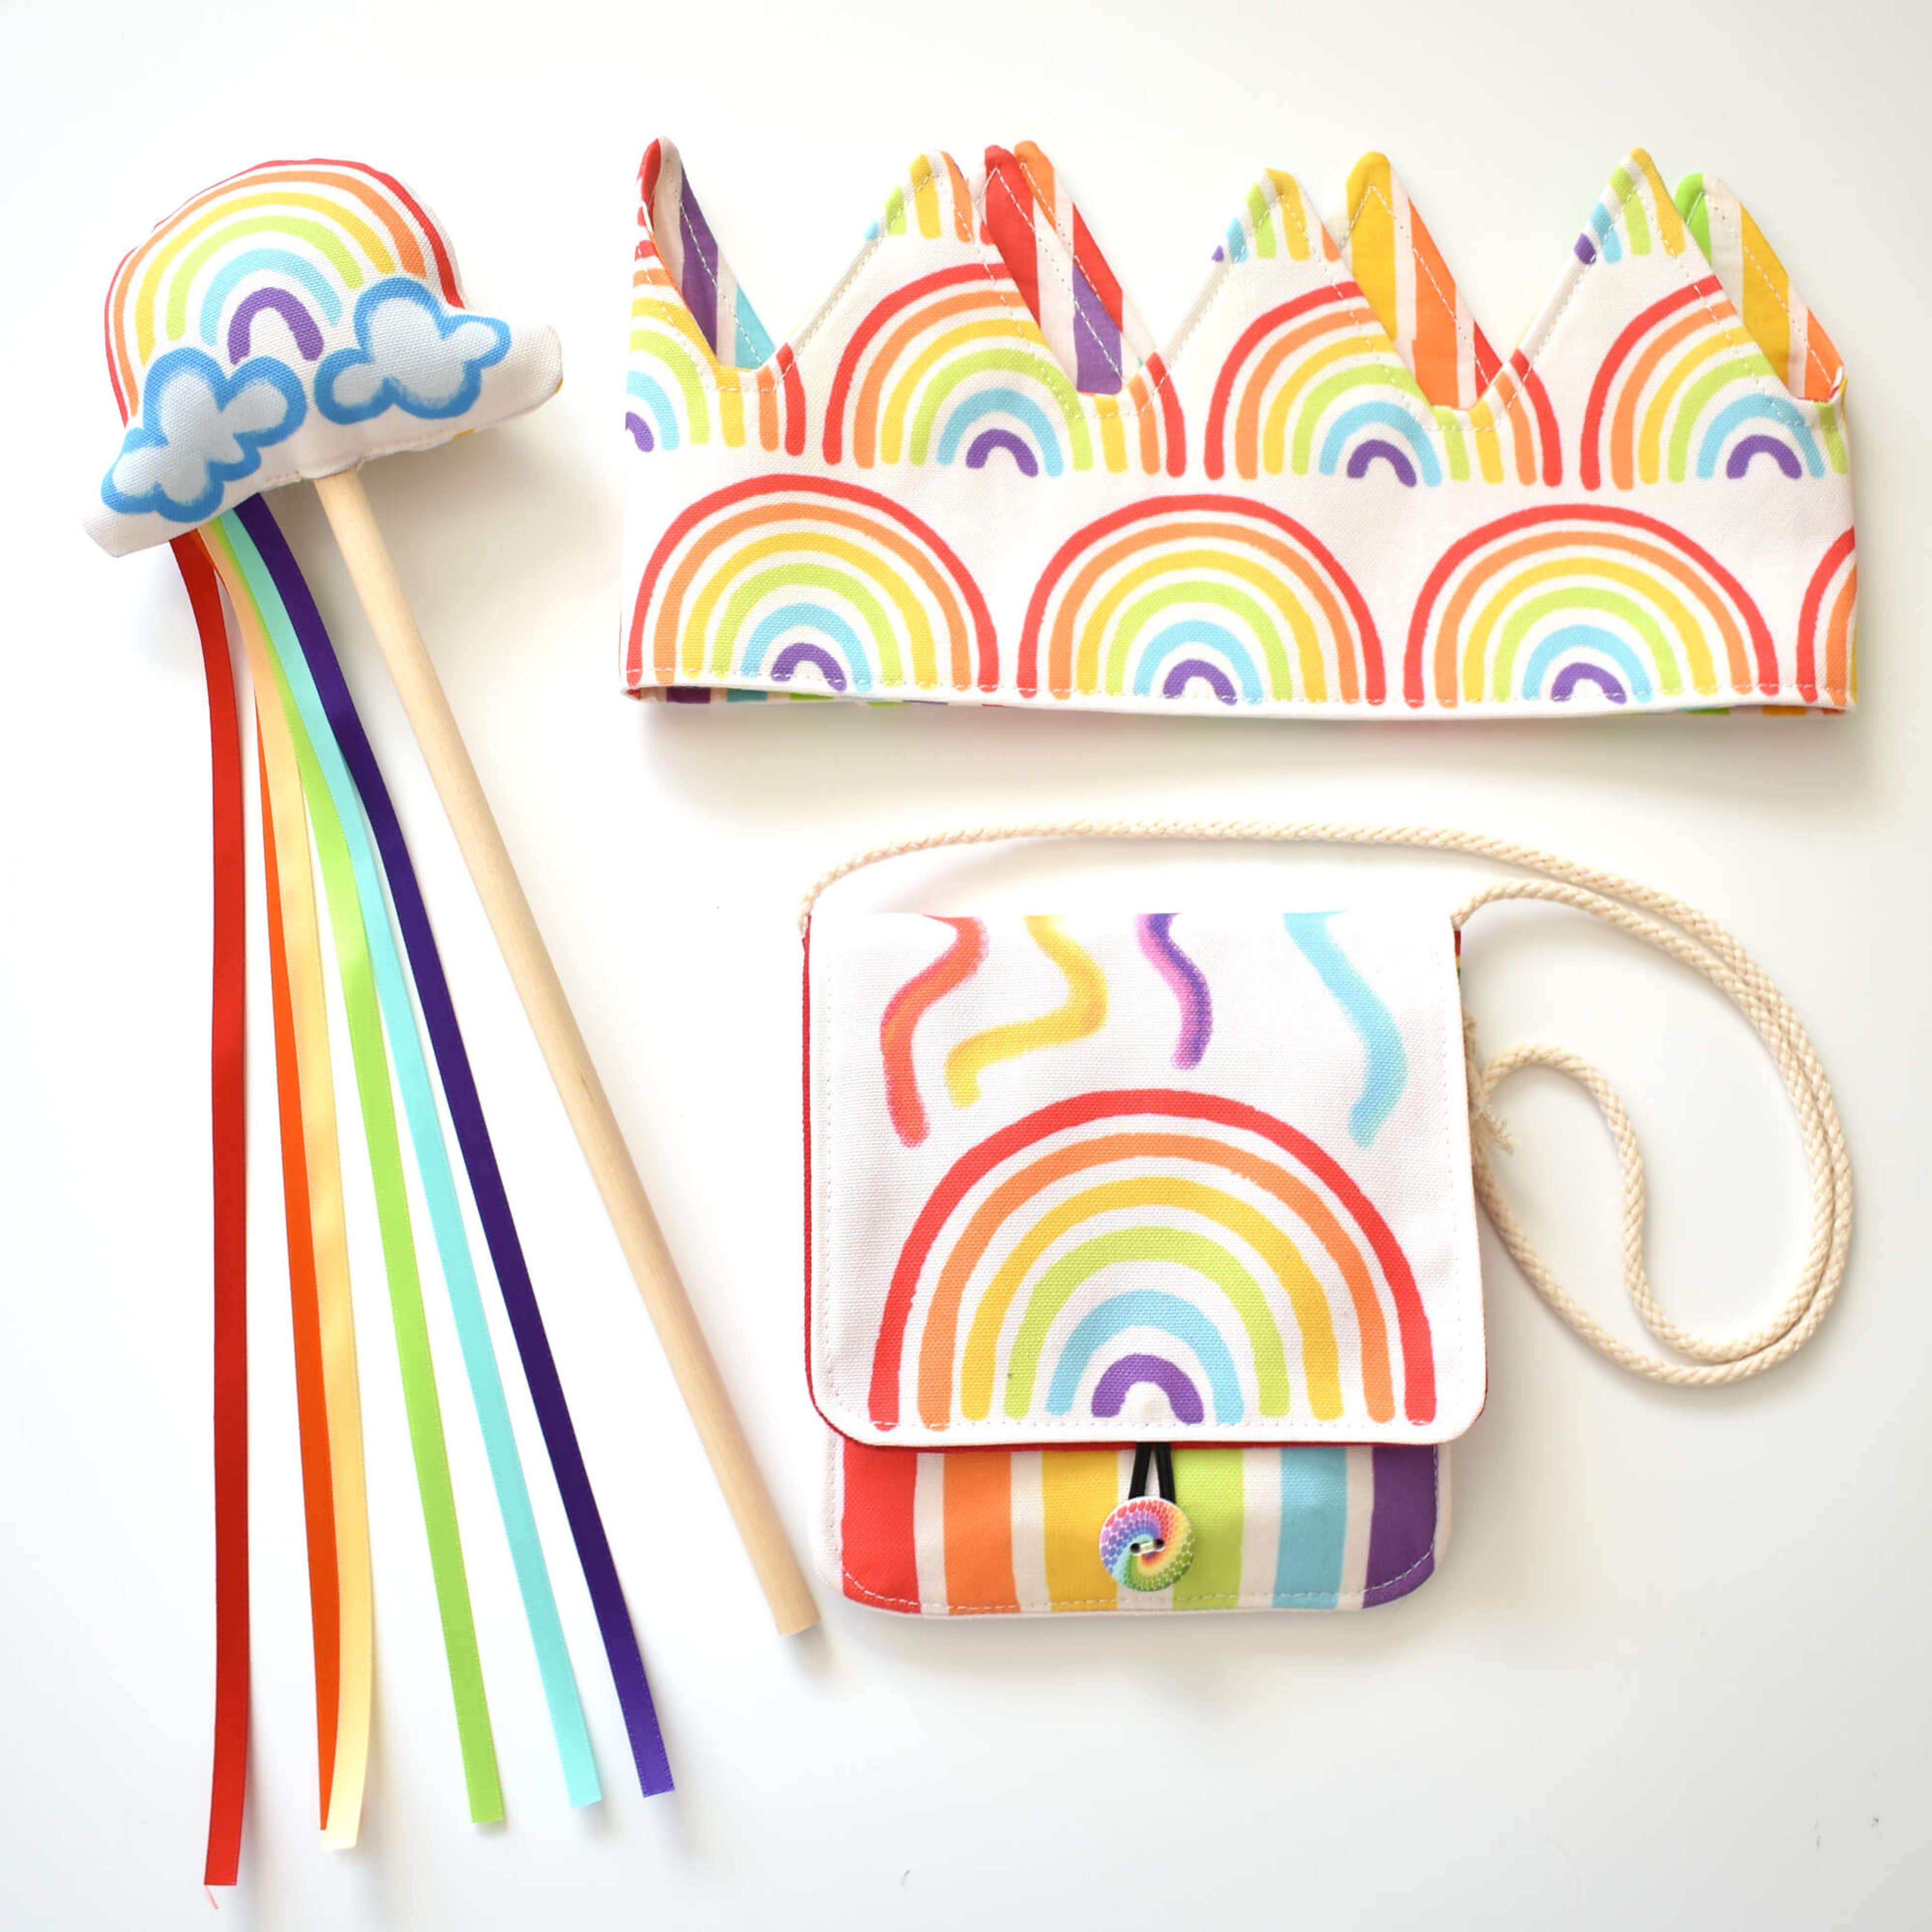 Rainbow Gifts: "Adorable! Perfect for my daughters costume!"